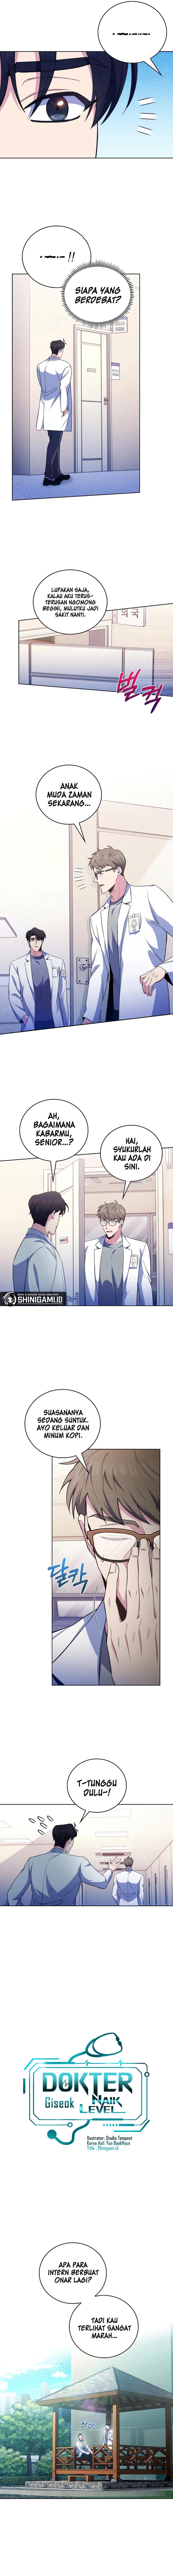 Level-Up Doctor Chapter 58 - 83